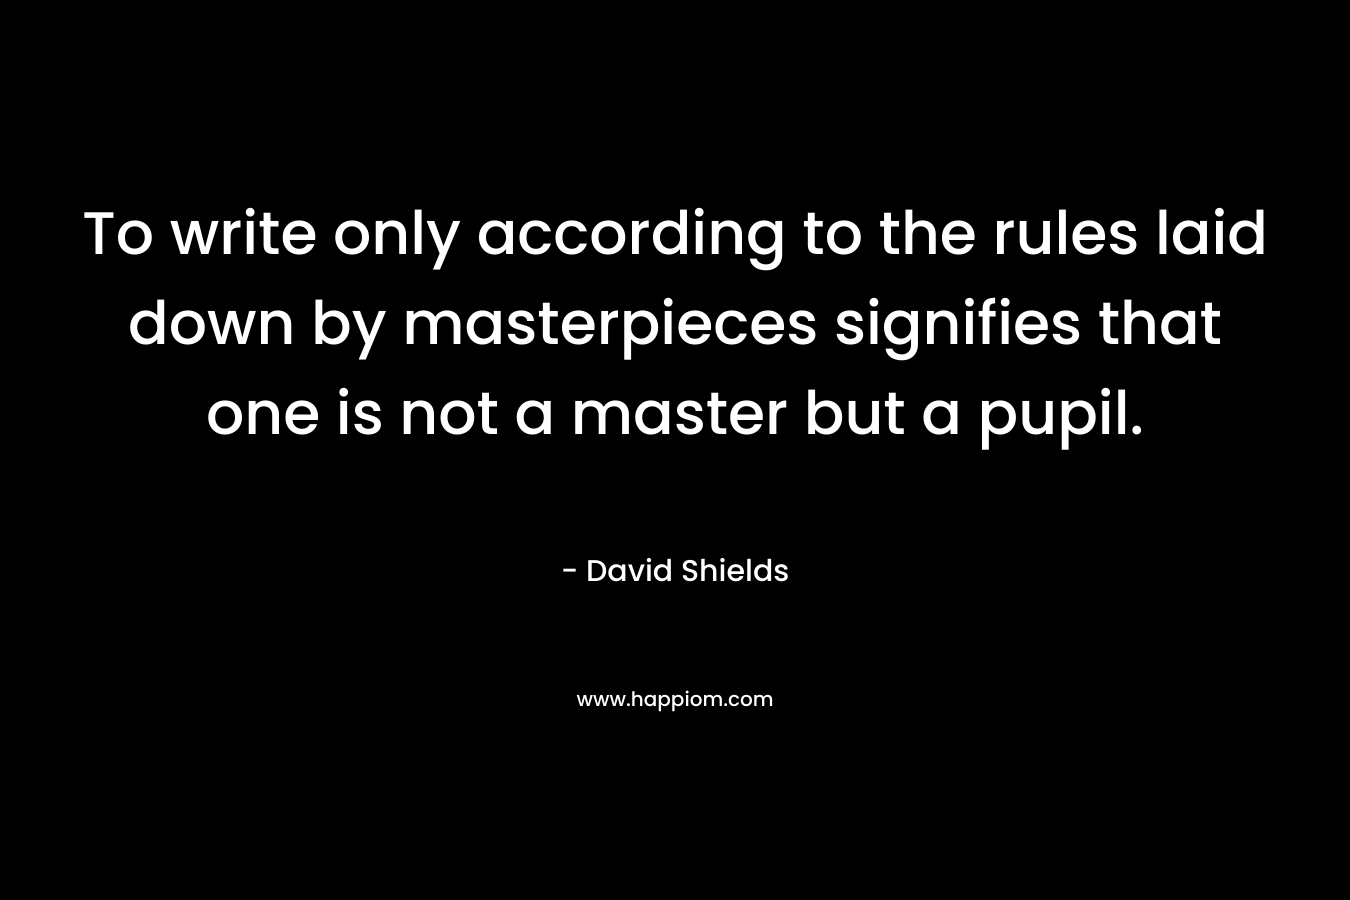 To write only according to the rules laid down by masterpieces signifies that one is not a master but a pupil. – David Shields